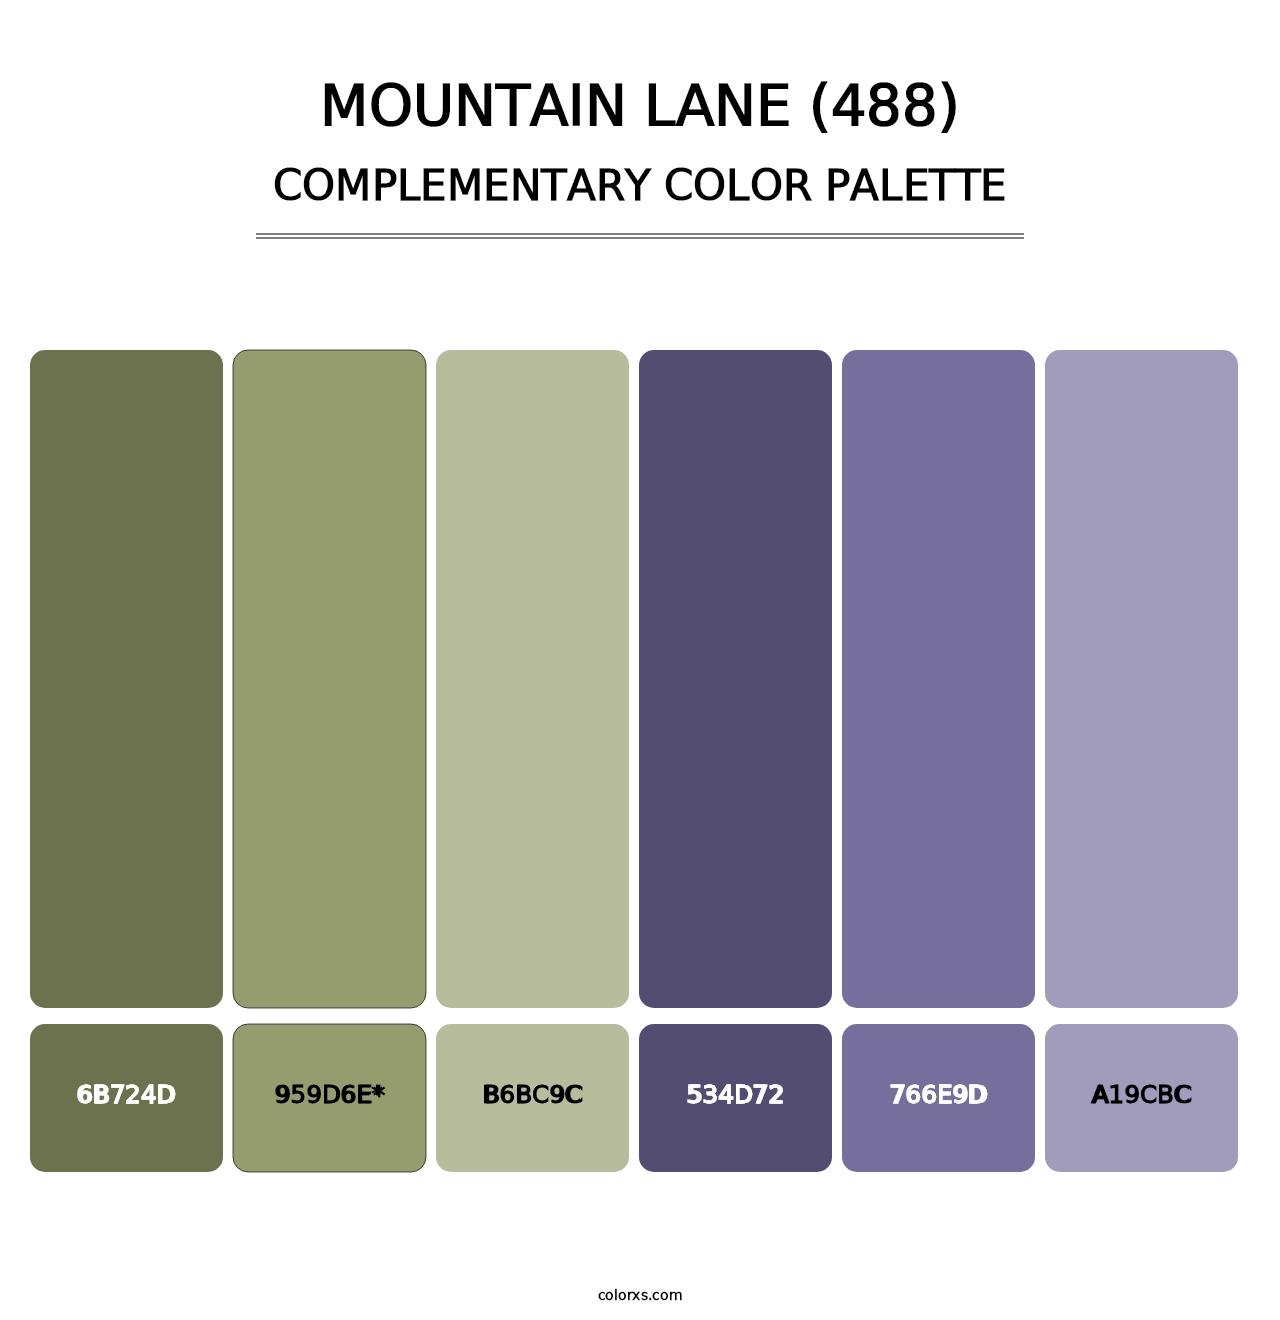 Mountain Lane (488) - Complementary Color Palette